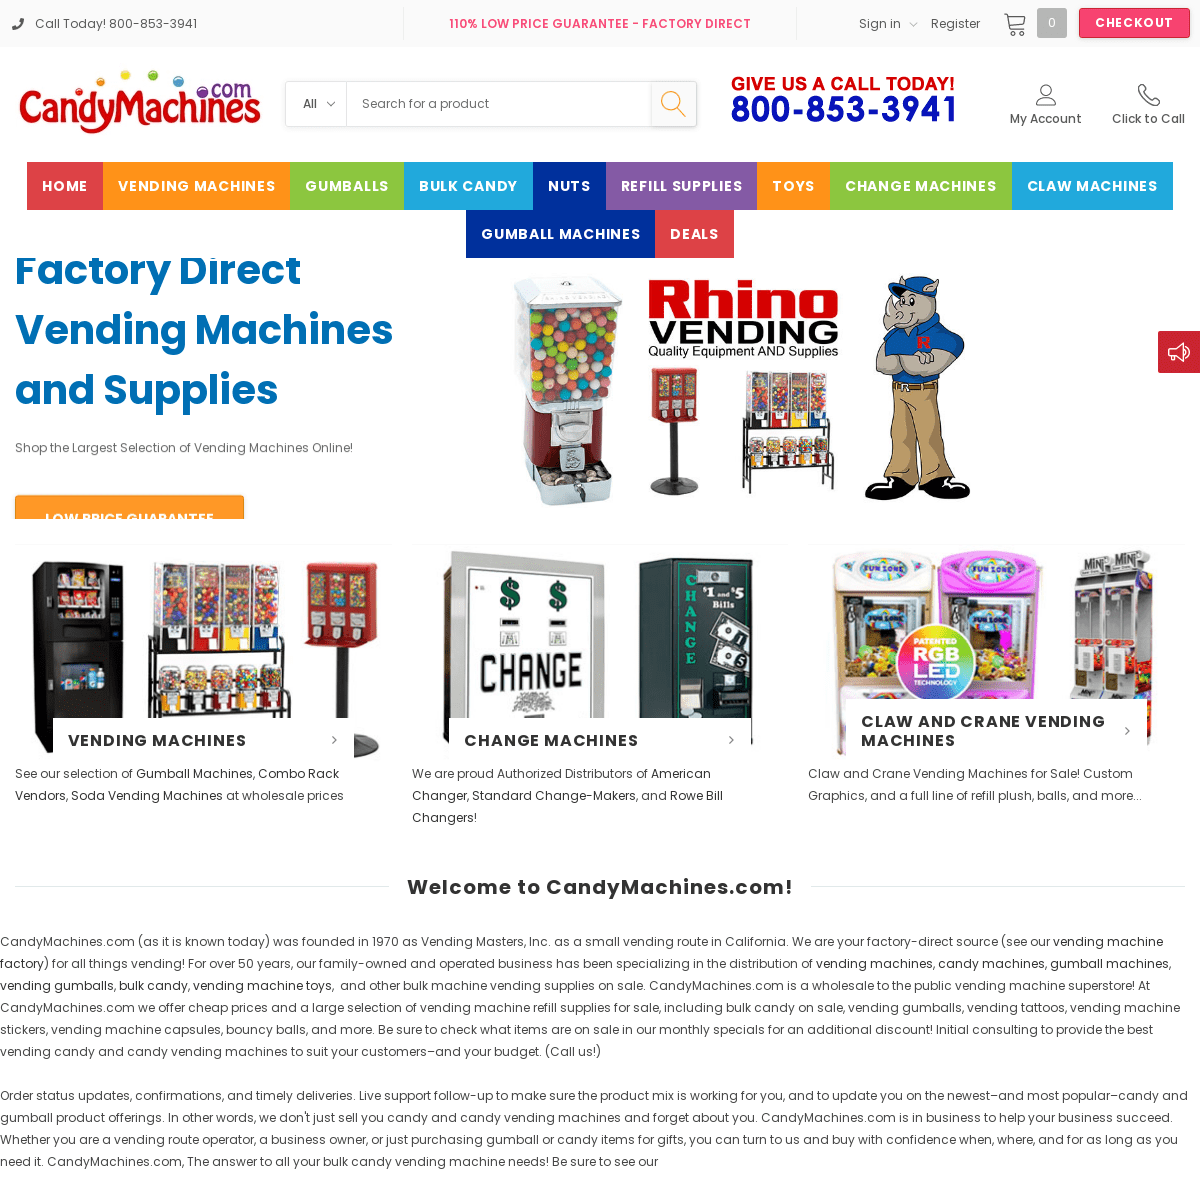 A complete backup of https://candymachines.com